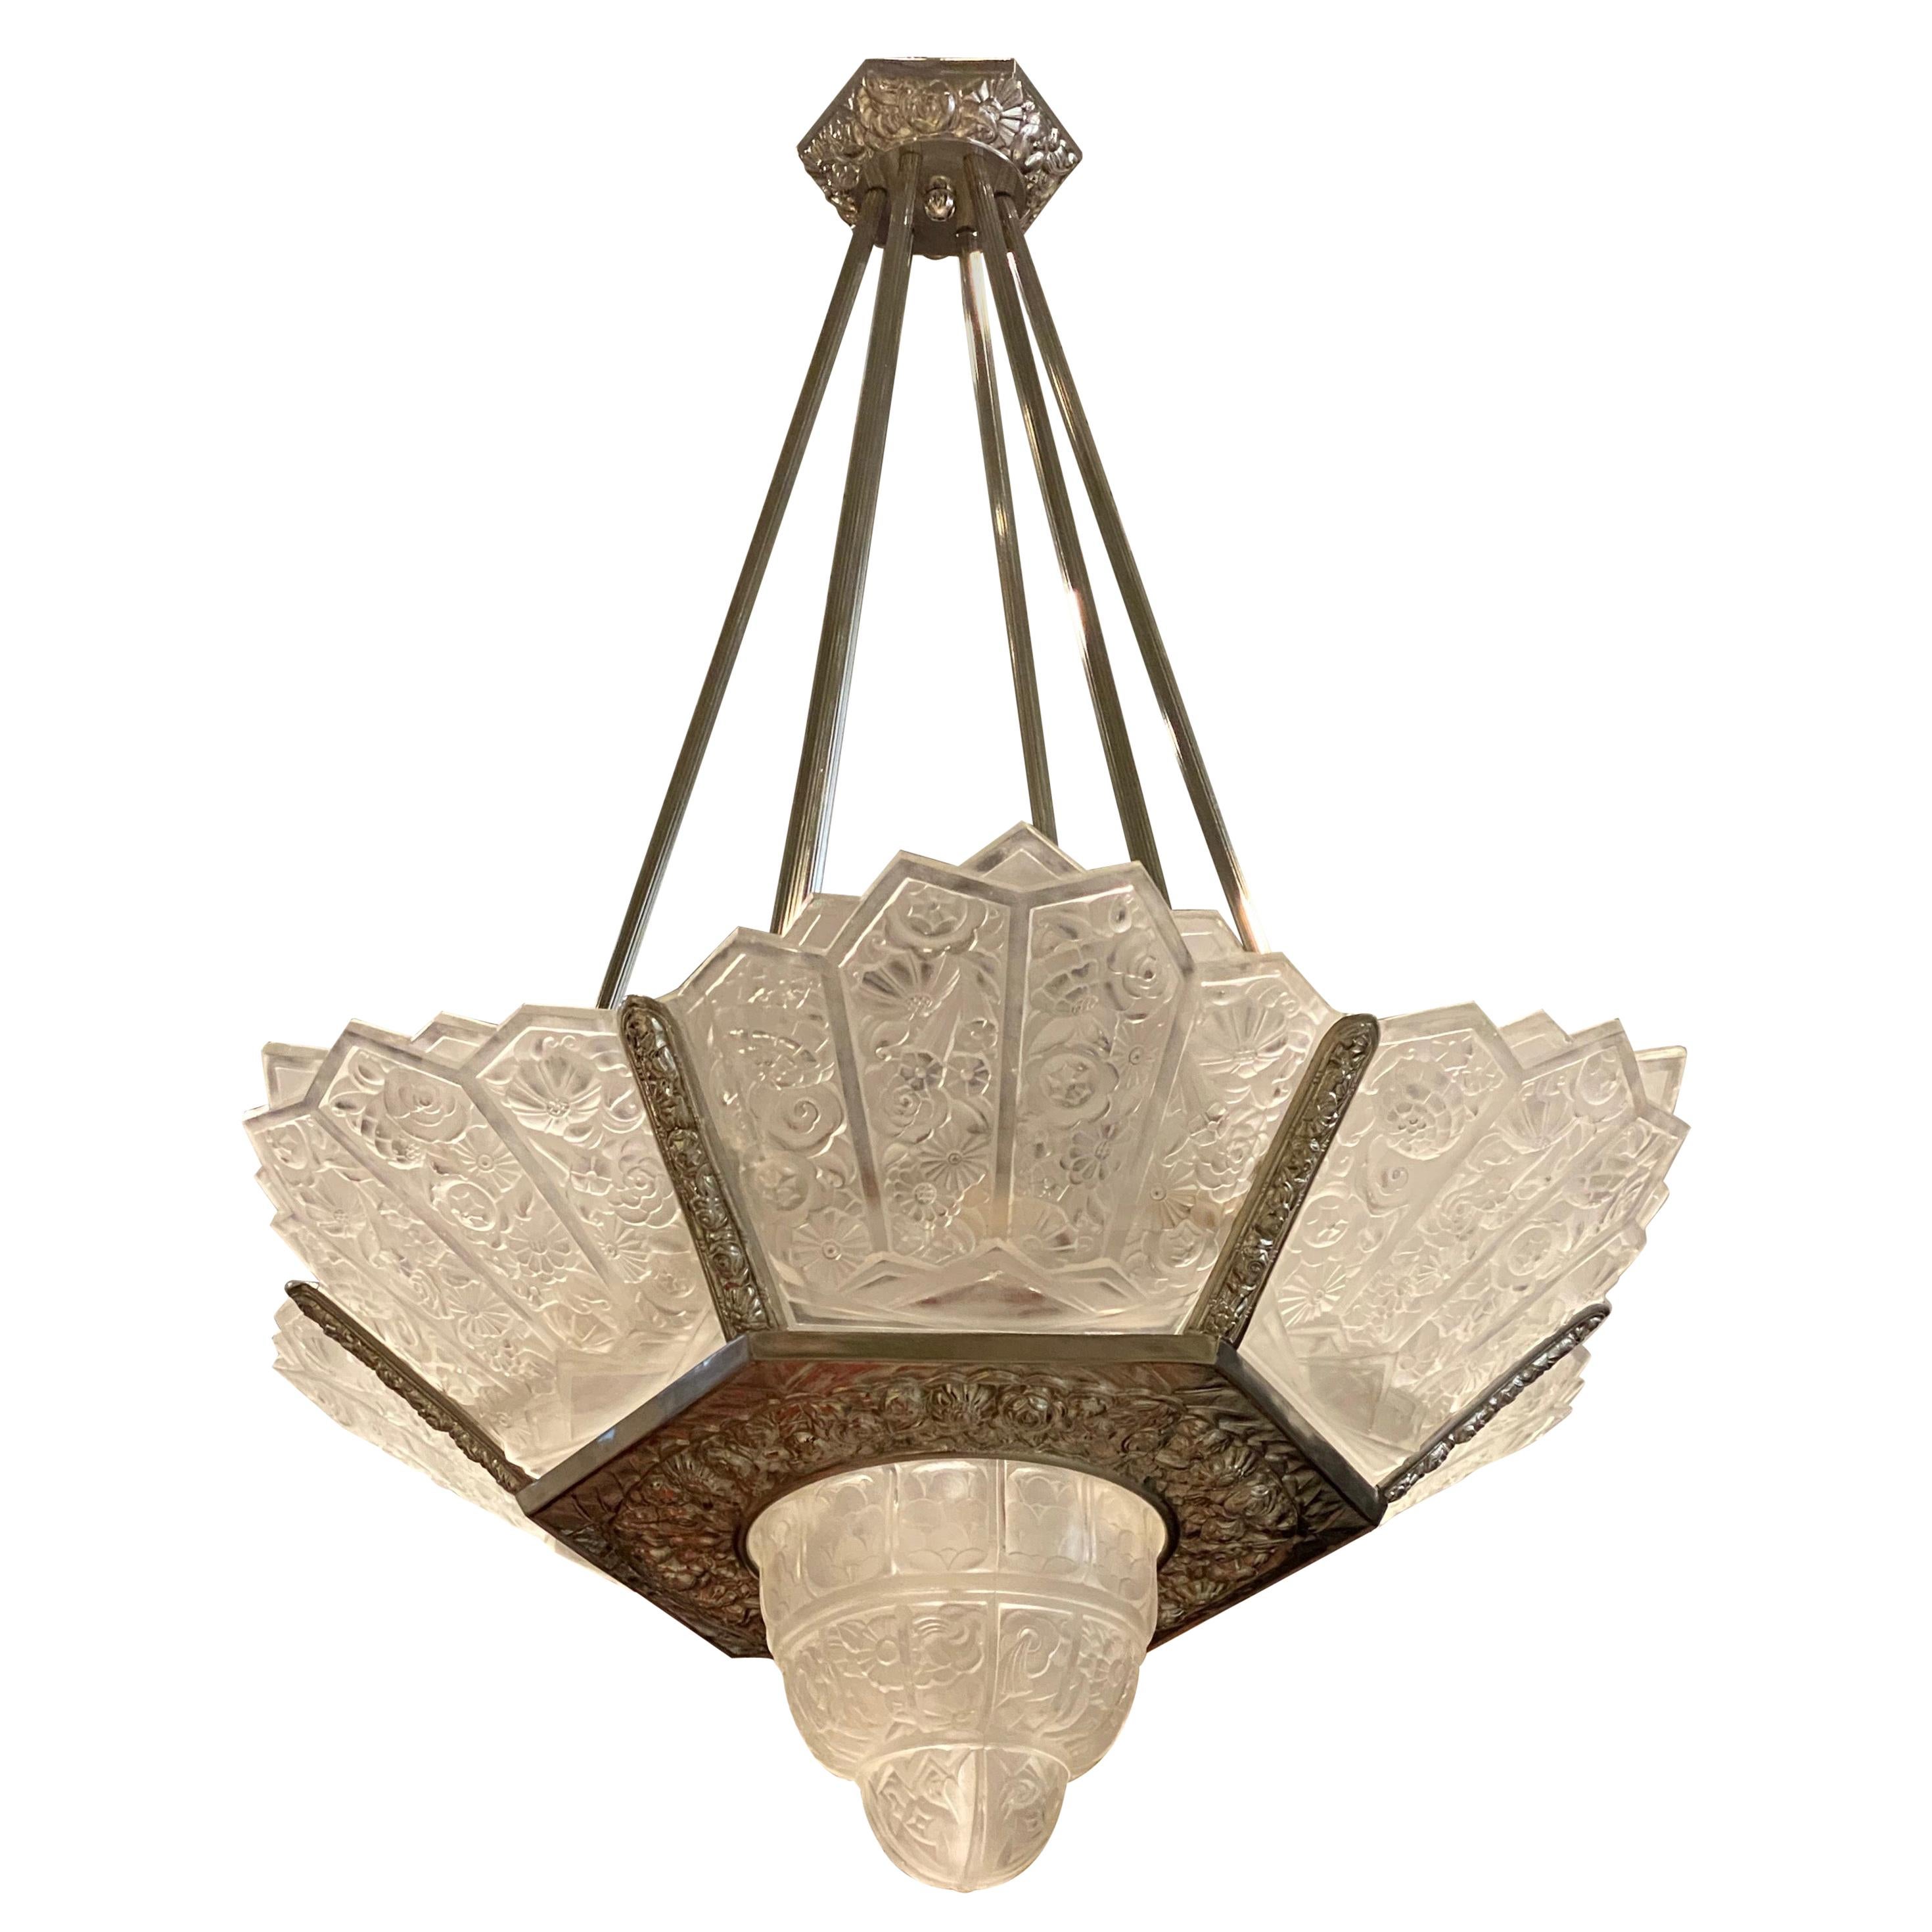 Grand French Art Deco Chandelier by Hettier Vincent